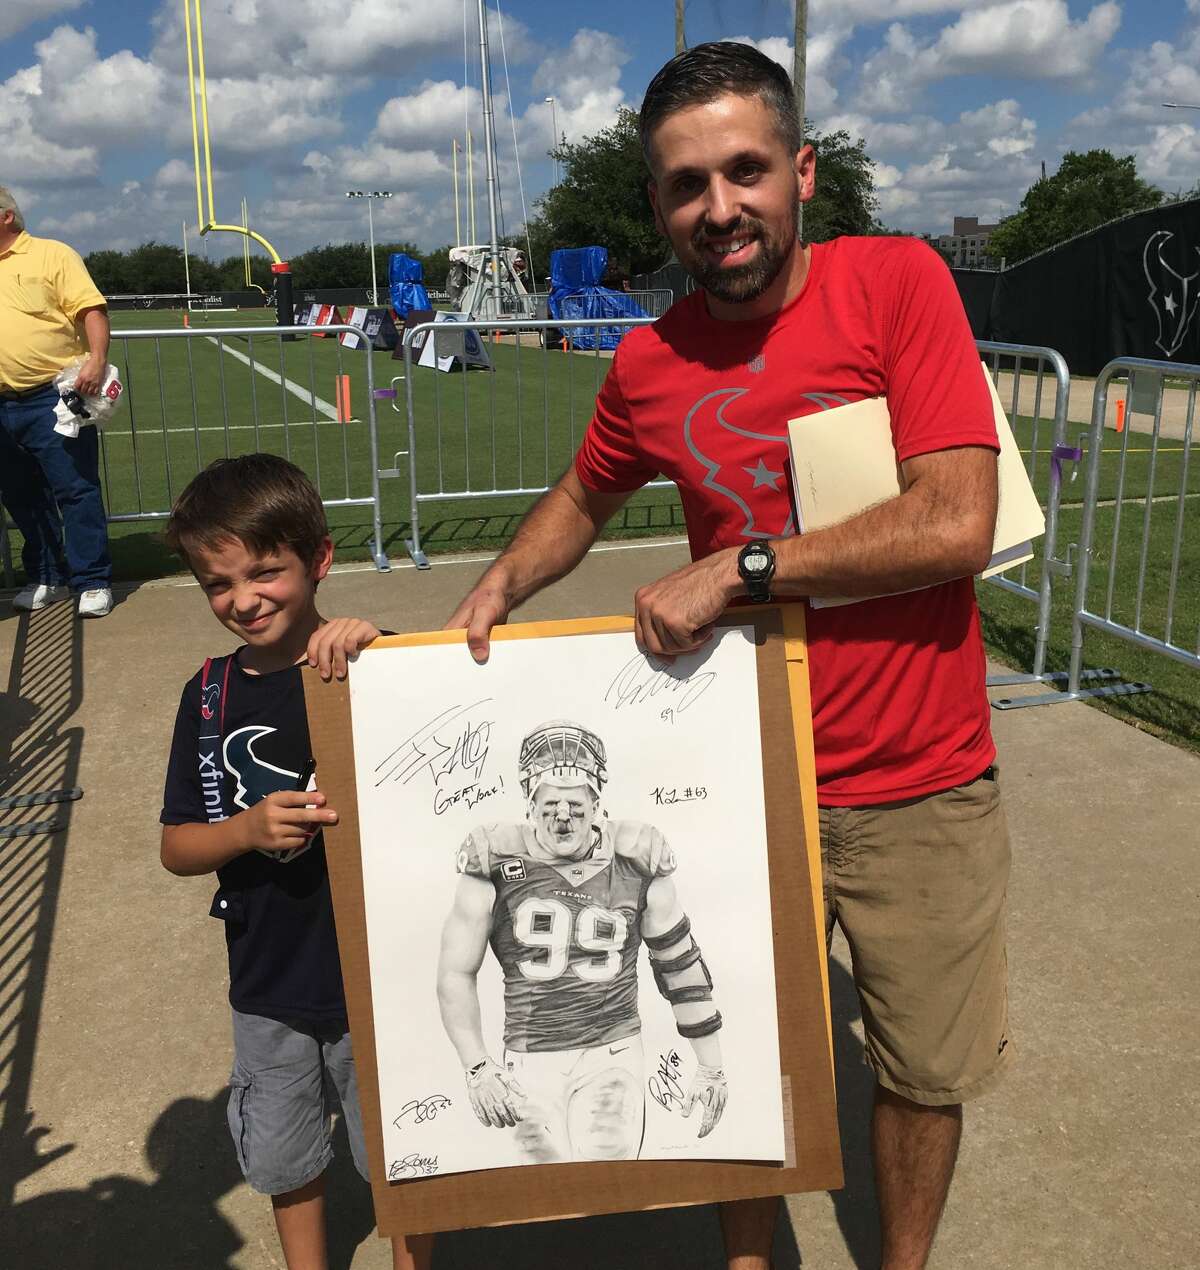 PHOTOS: A look at J.J. Watt at Houston Texans training camp Terry Harman and his son show off his J.J. Watt pencil drawing that he got Watt to autograph after Monday's Houston Texans practice. Browse through the photos above to see J.J. Watt at Houston Texans training camp.